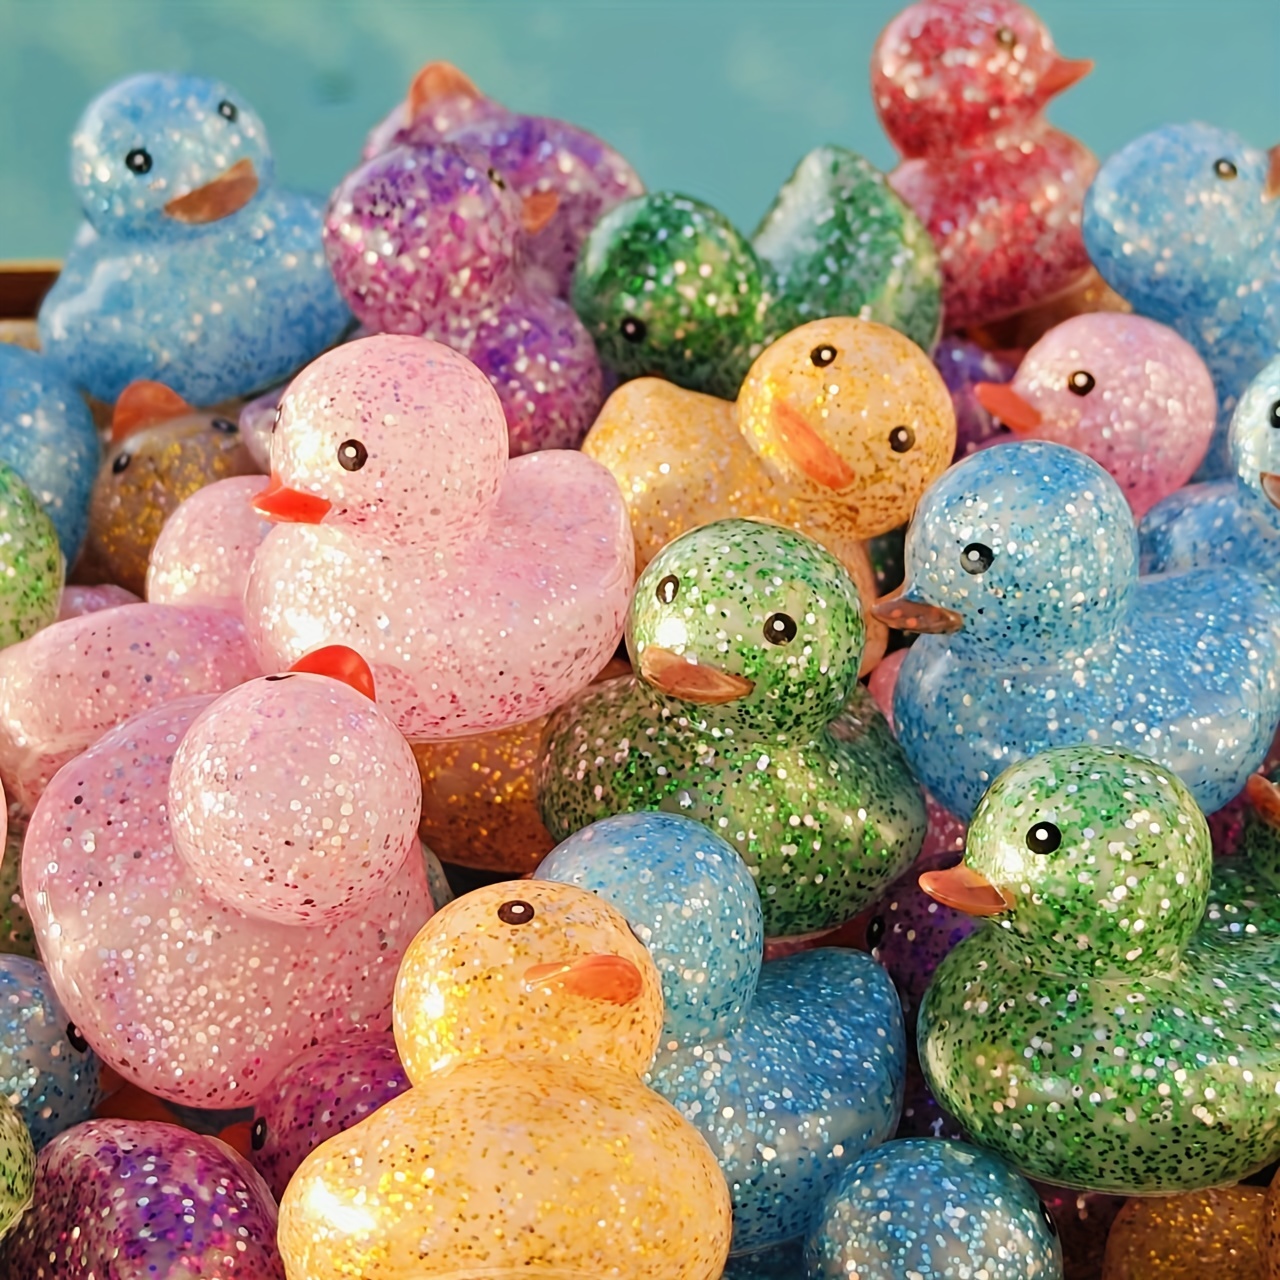 

50/100-piece Sparkling Glitter Ducks - Vibrant, Transparent Pvc Tabletop Decor For Parties & Holidays, Indoor/outdoor Use